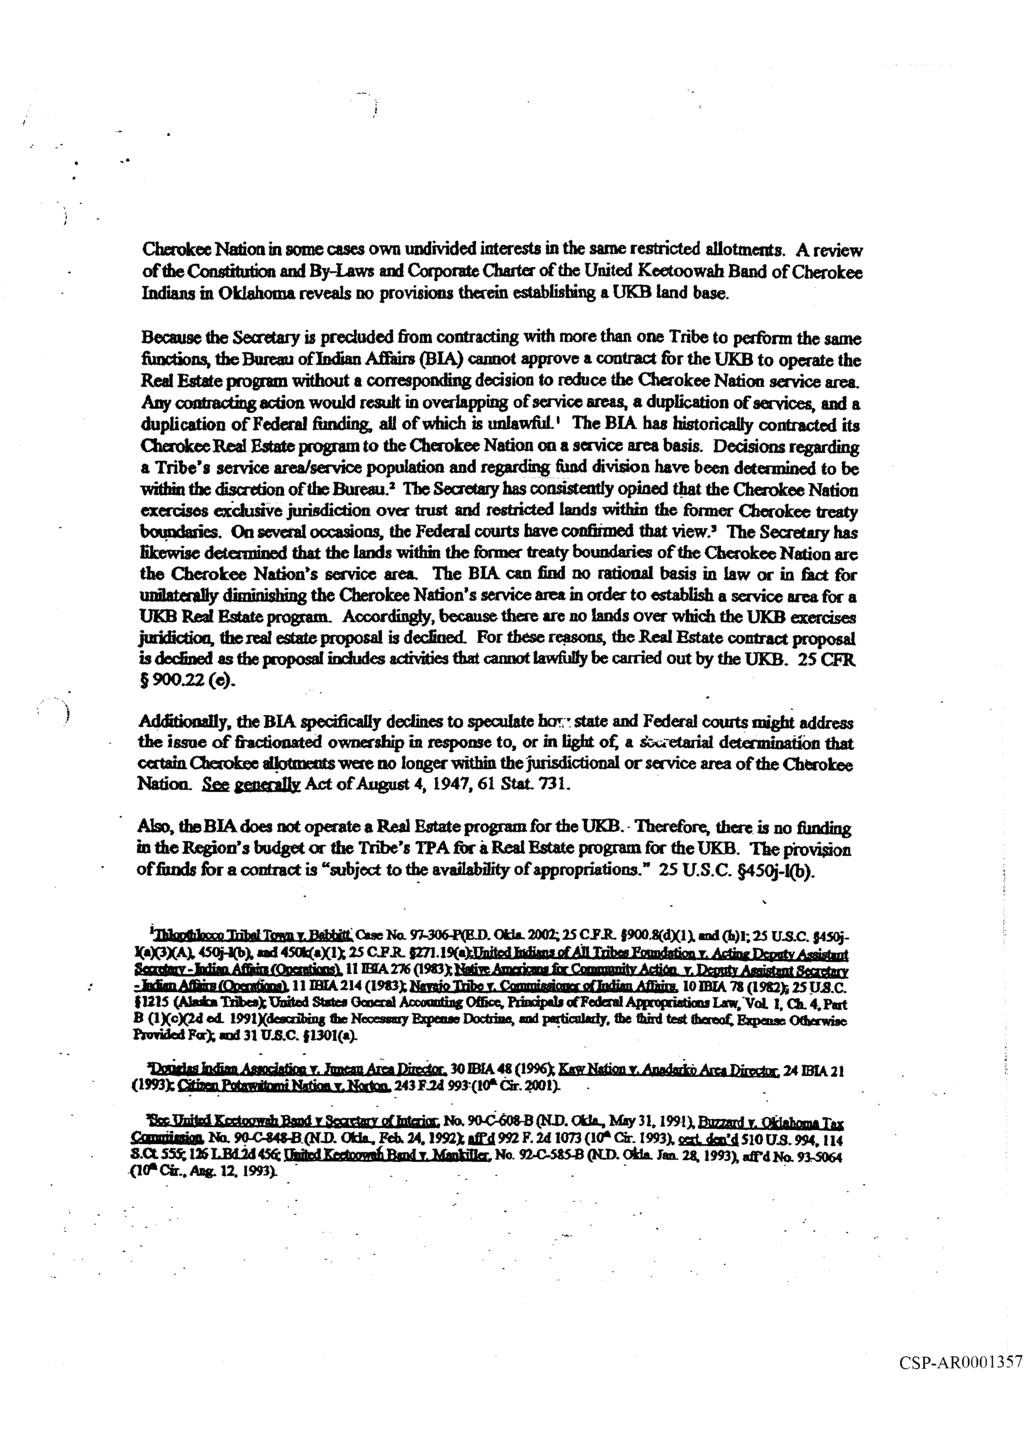 6:14-cv-00428-RAW Document 67-3 Filed in ED/OK on 08/14/15 Page 27 of 178 Appellate Case: 17-7044 Document: 01019930880 Date Filed: 01/16/2018 Page: 123.